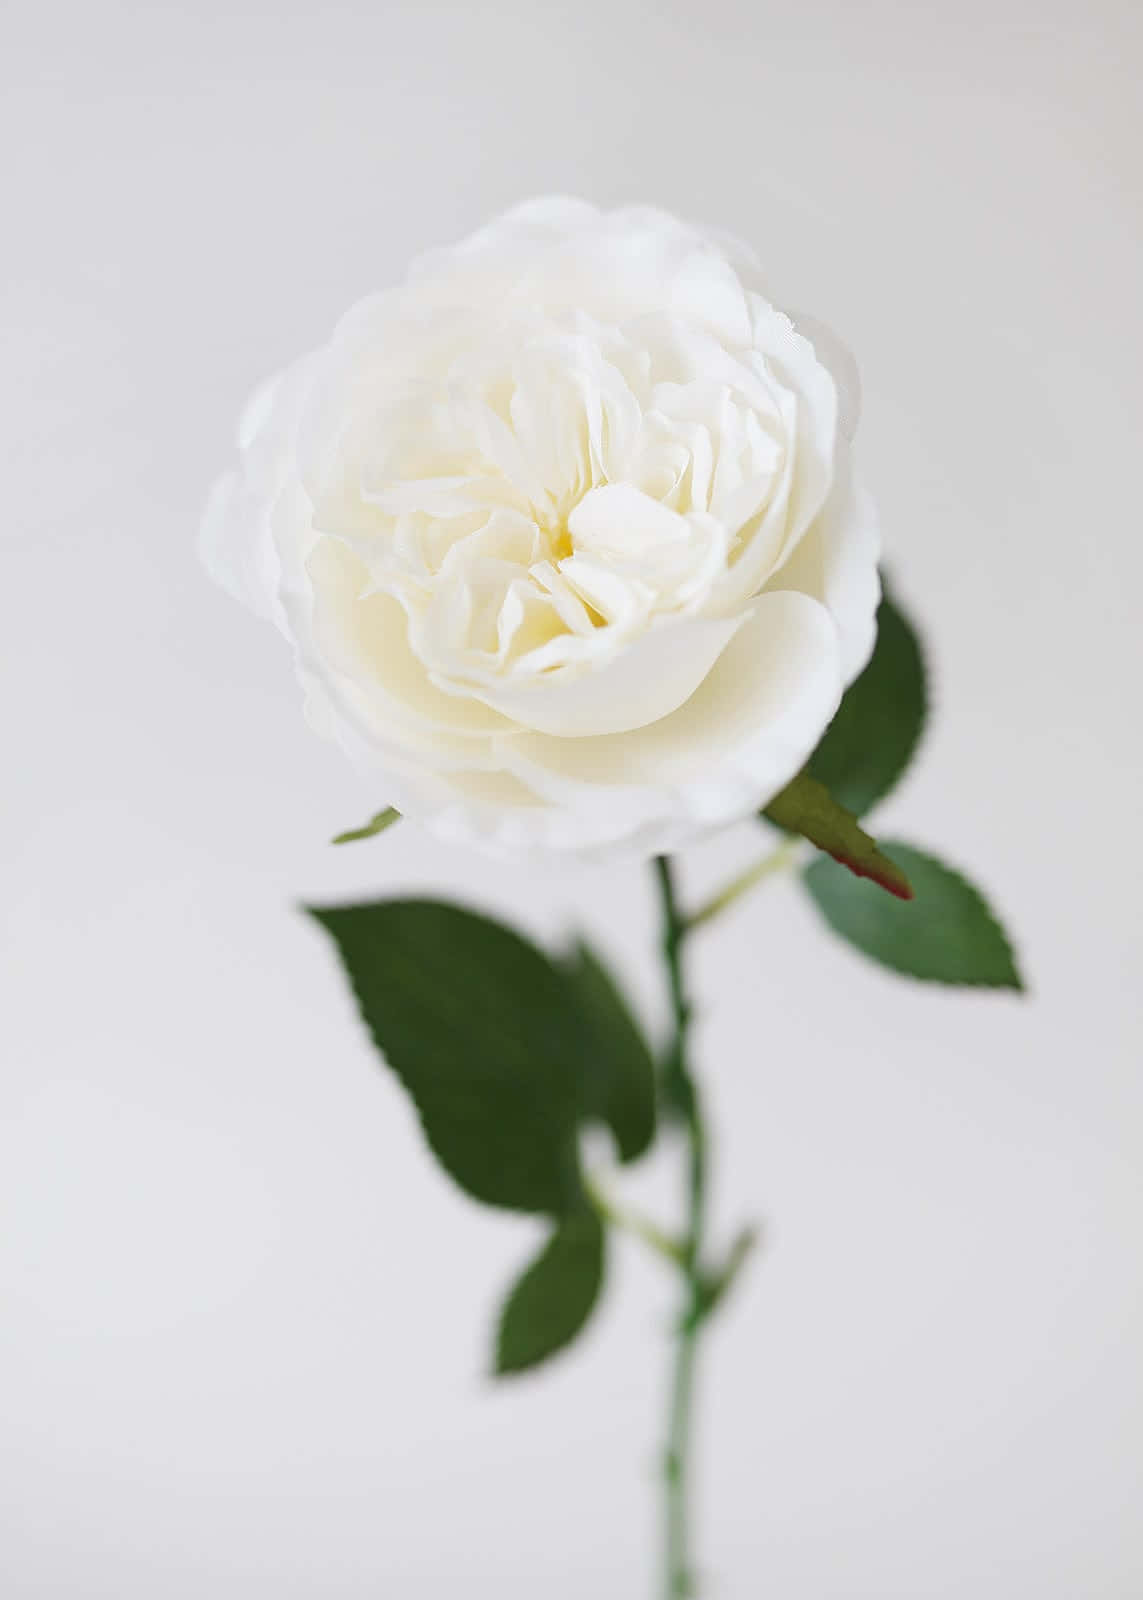 A delicate white rose against a white background